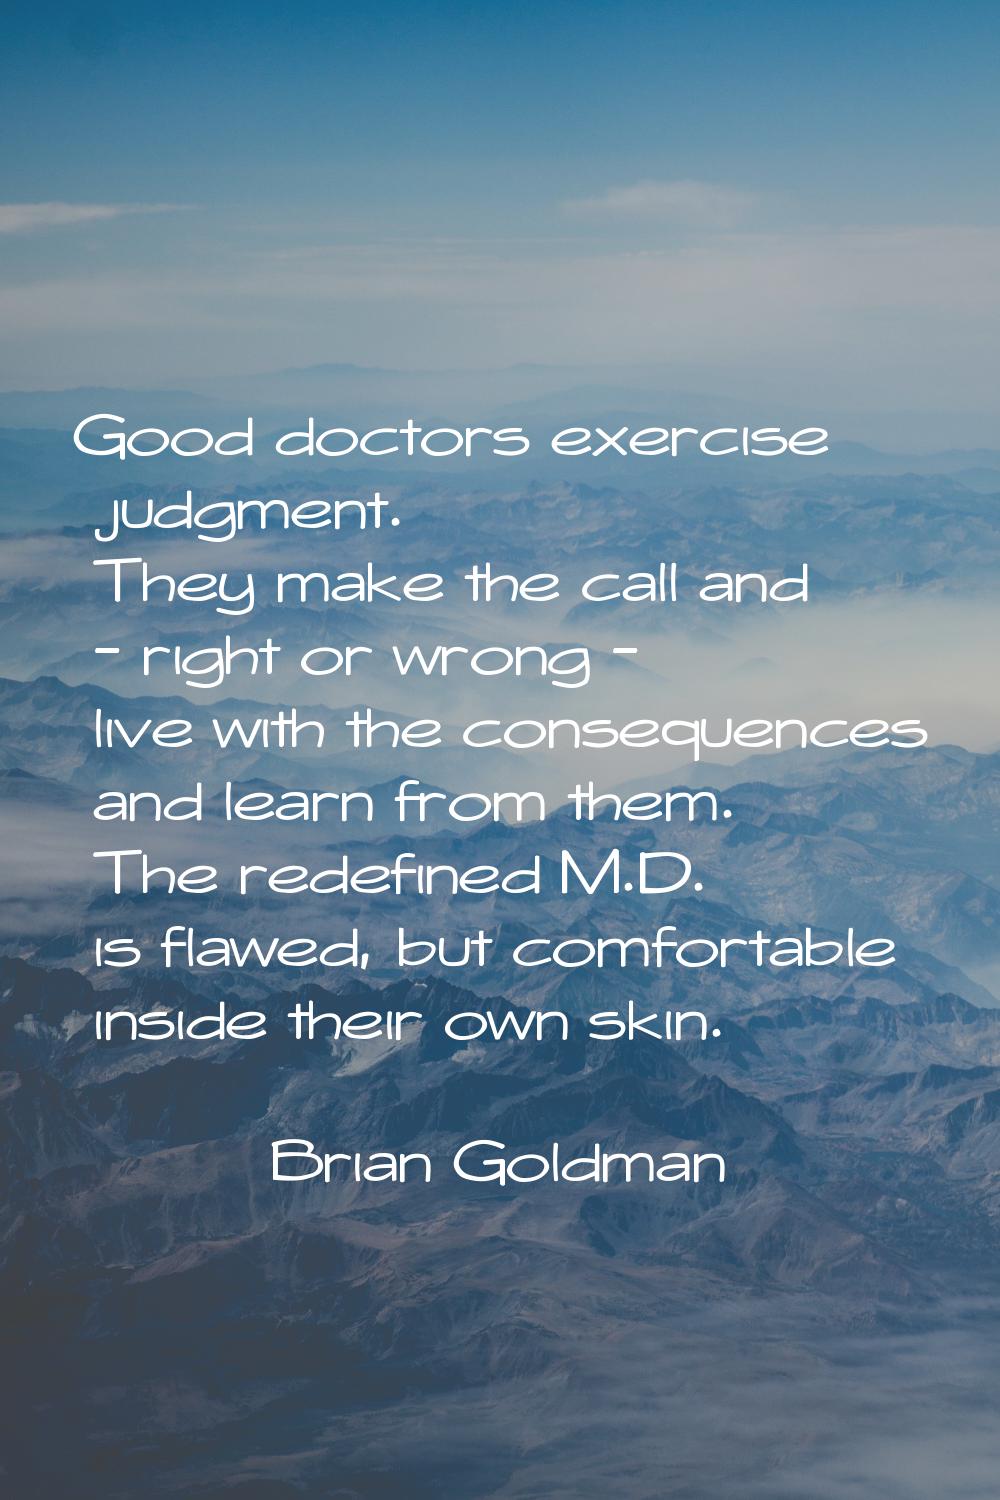 Good doctors exercise judgment. They make the call and - right or wrong - live with the consequence